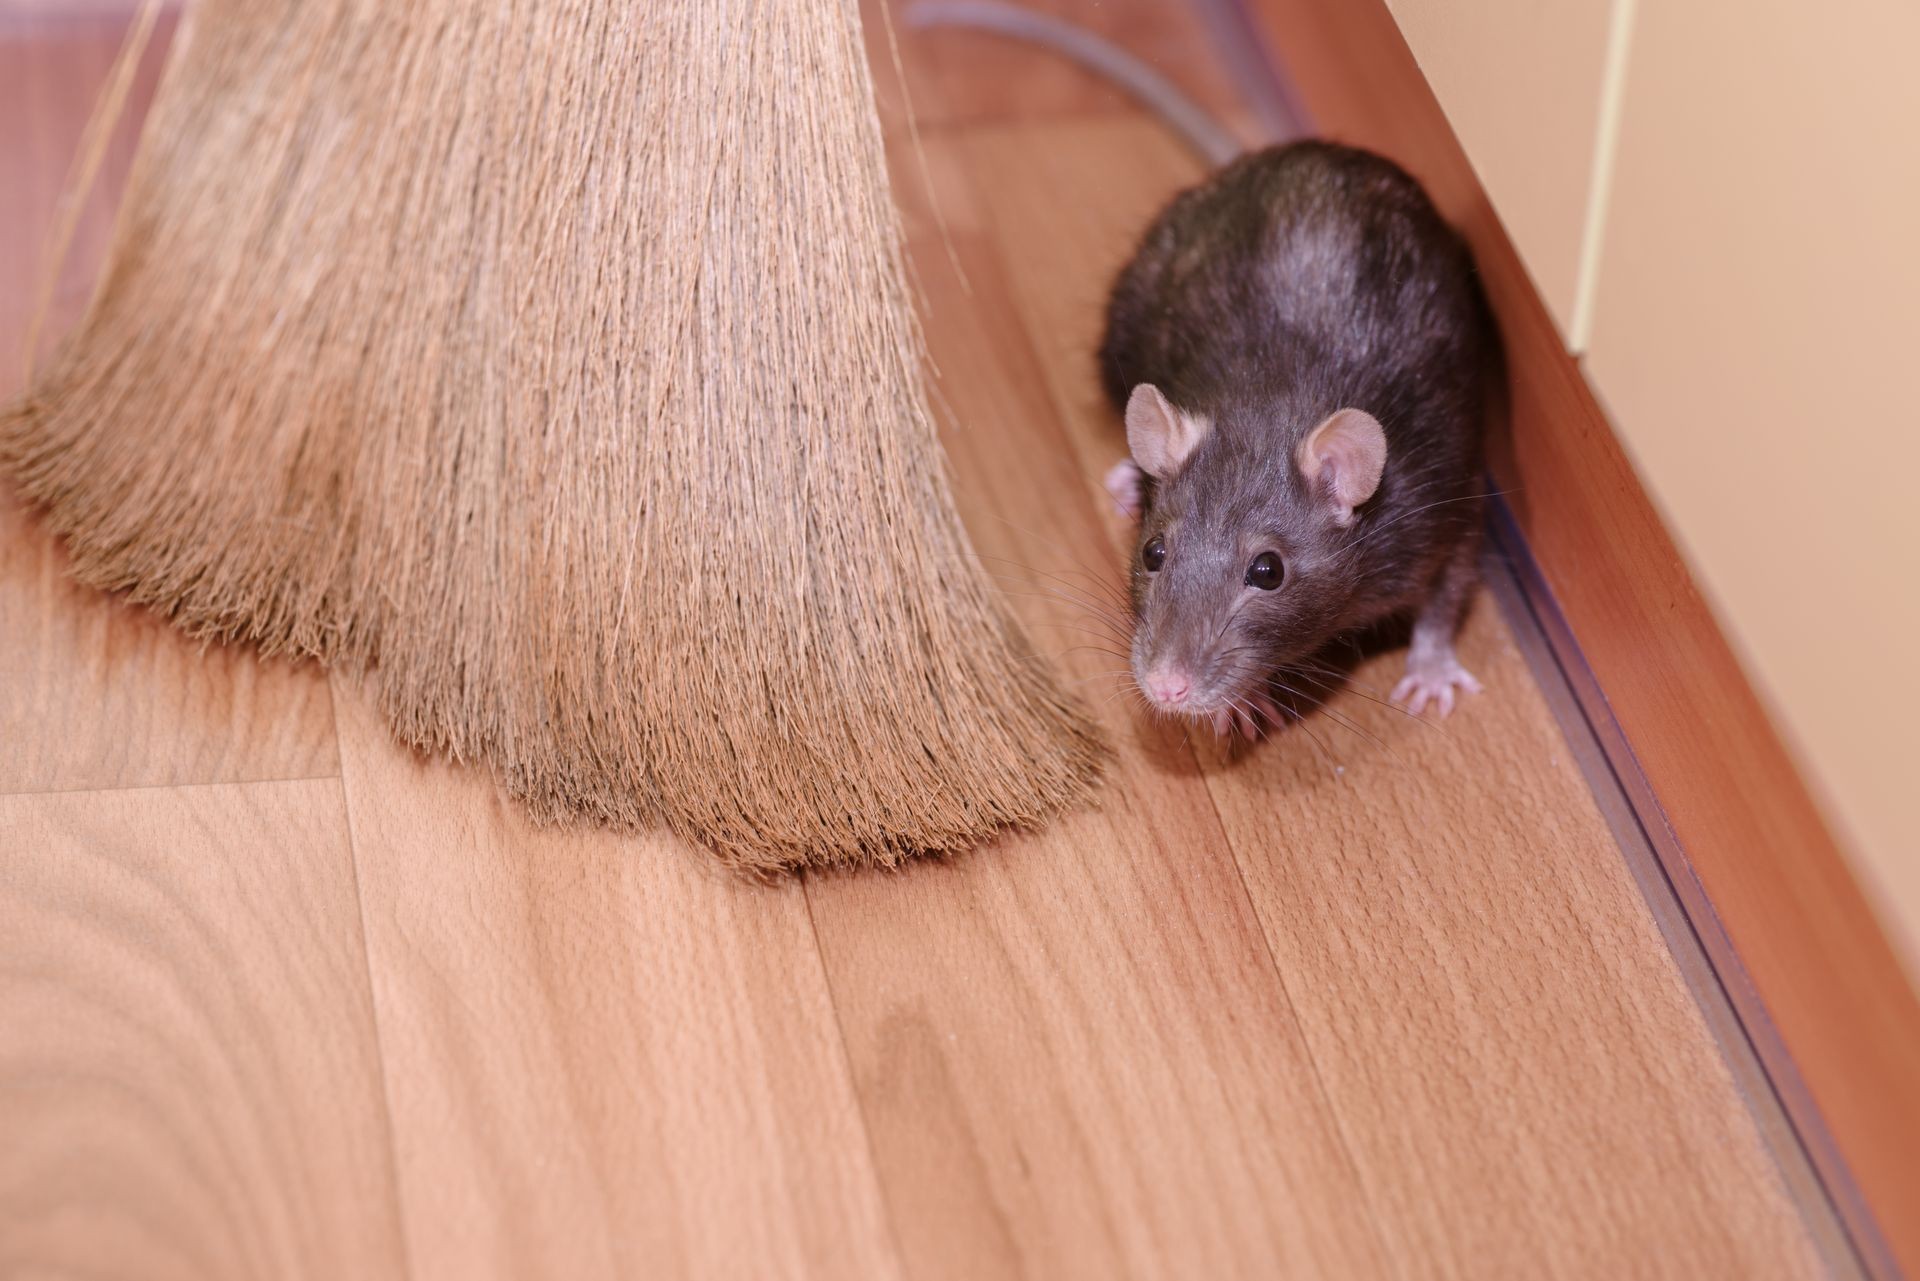 The gray mouse hides for a broom